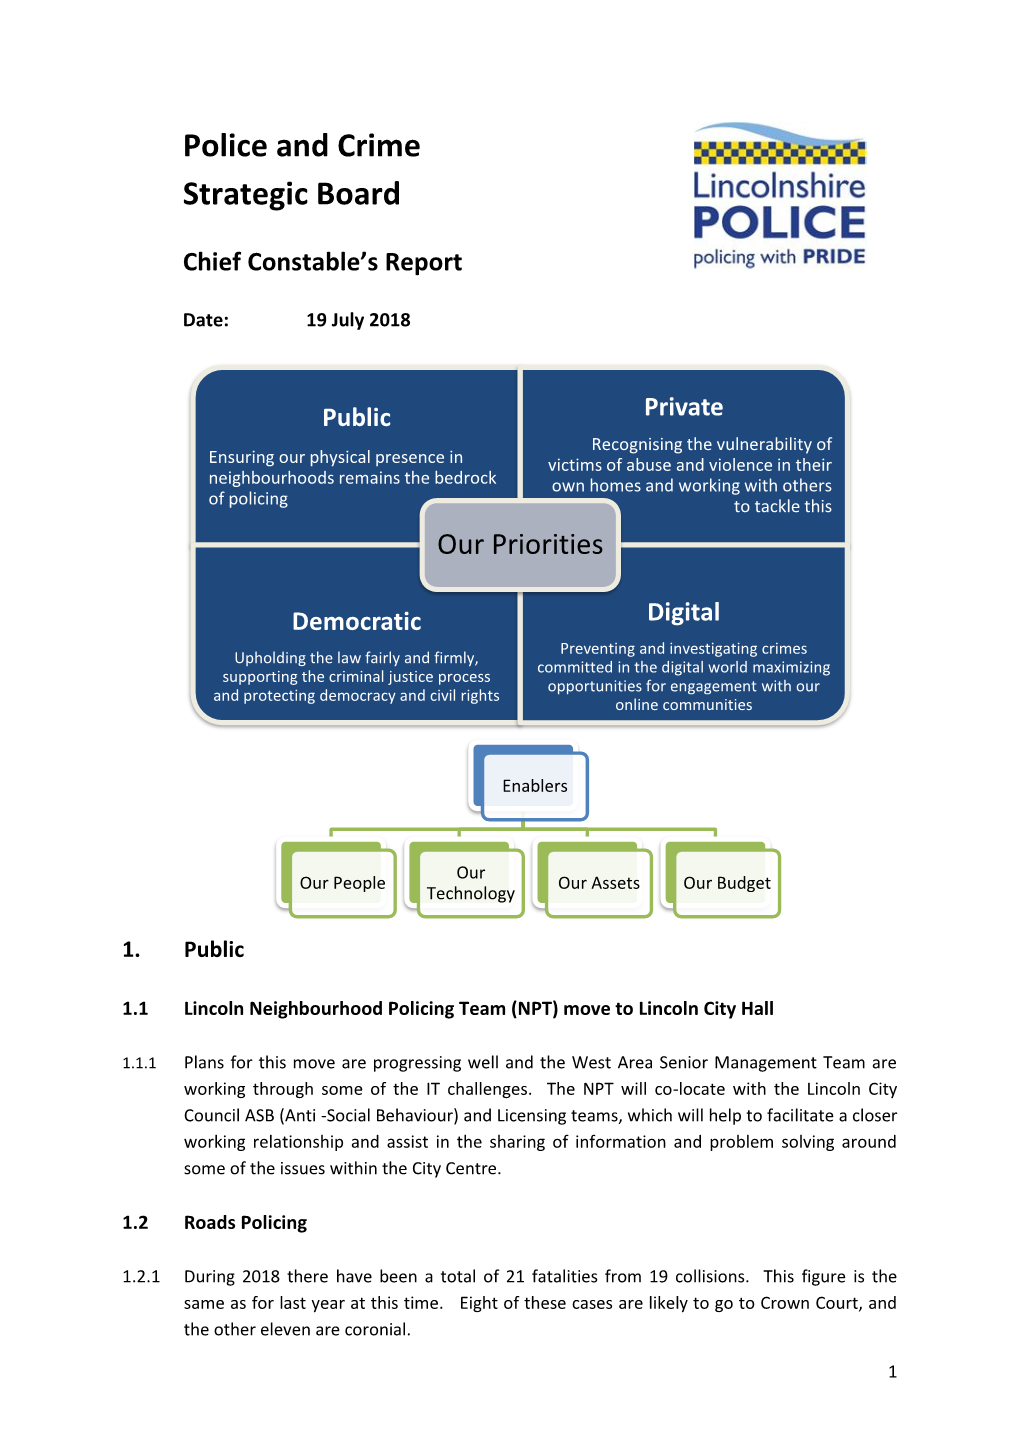 July 2018: Chief Constable's Report